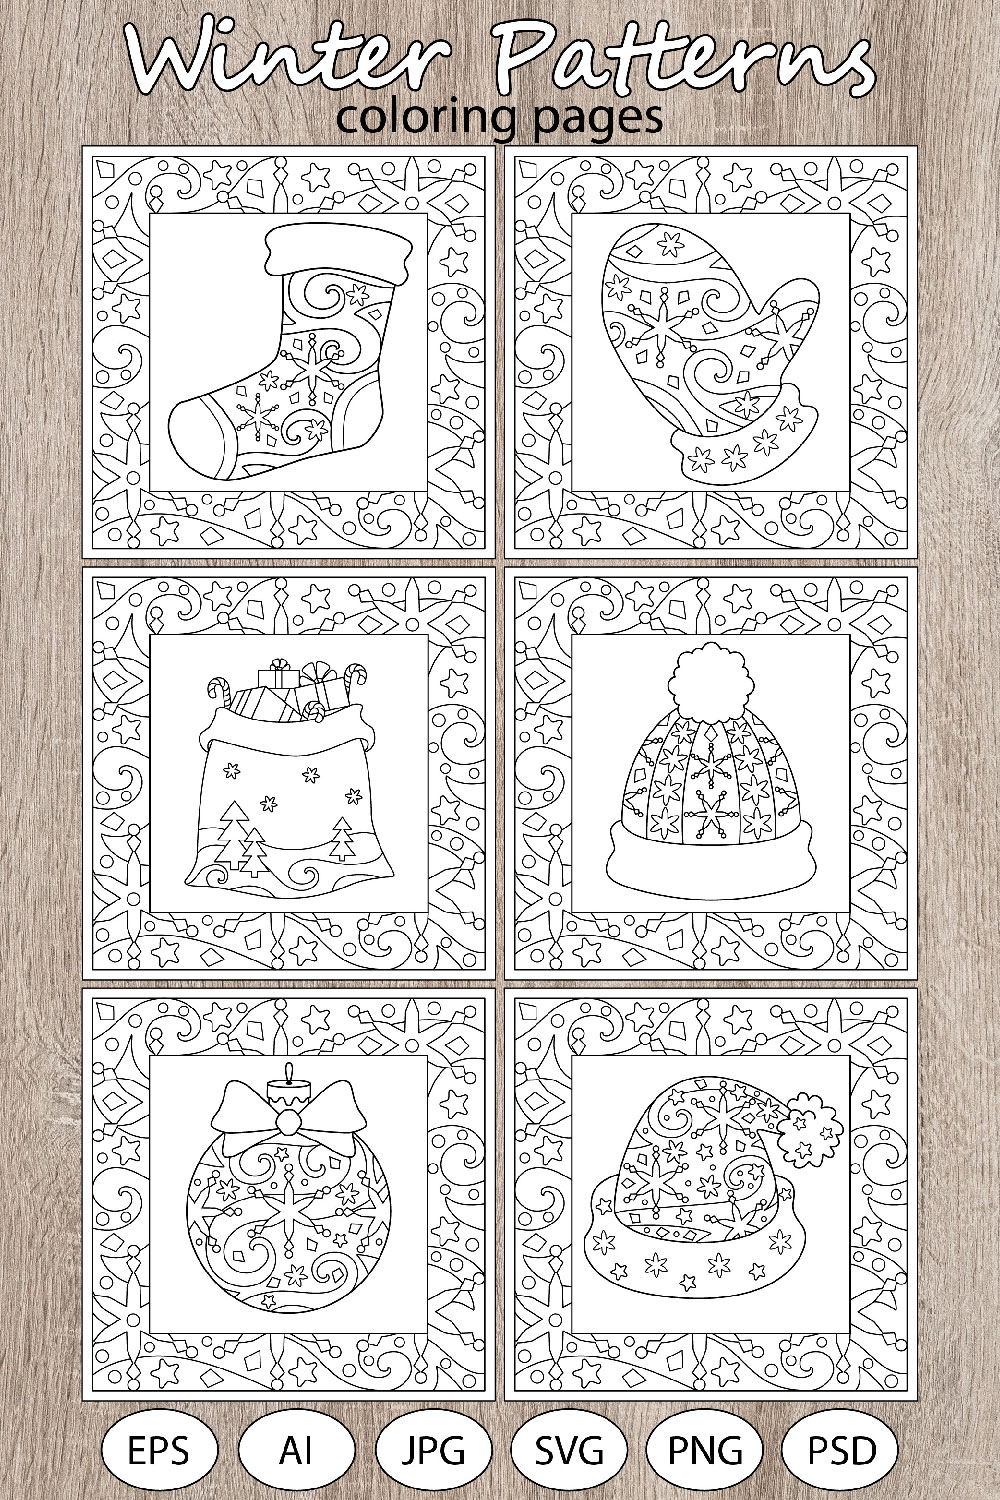 Winter Patterns - 6 coloring pages pinterest preview image.